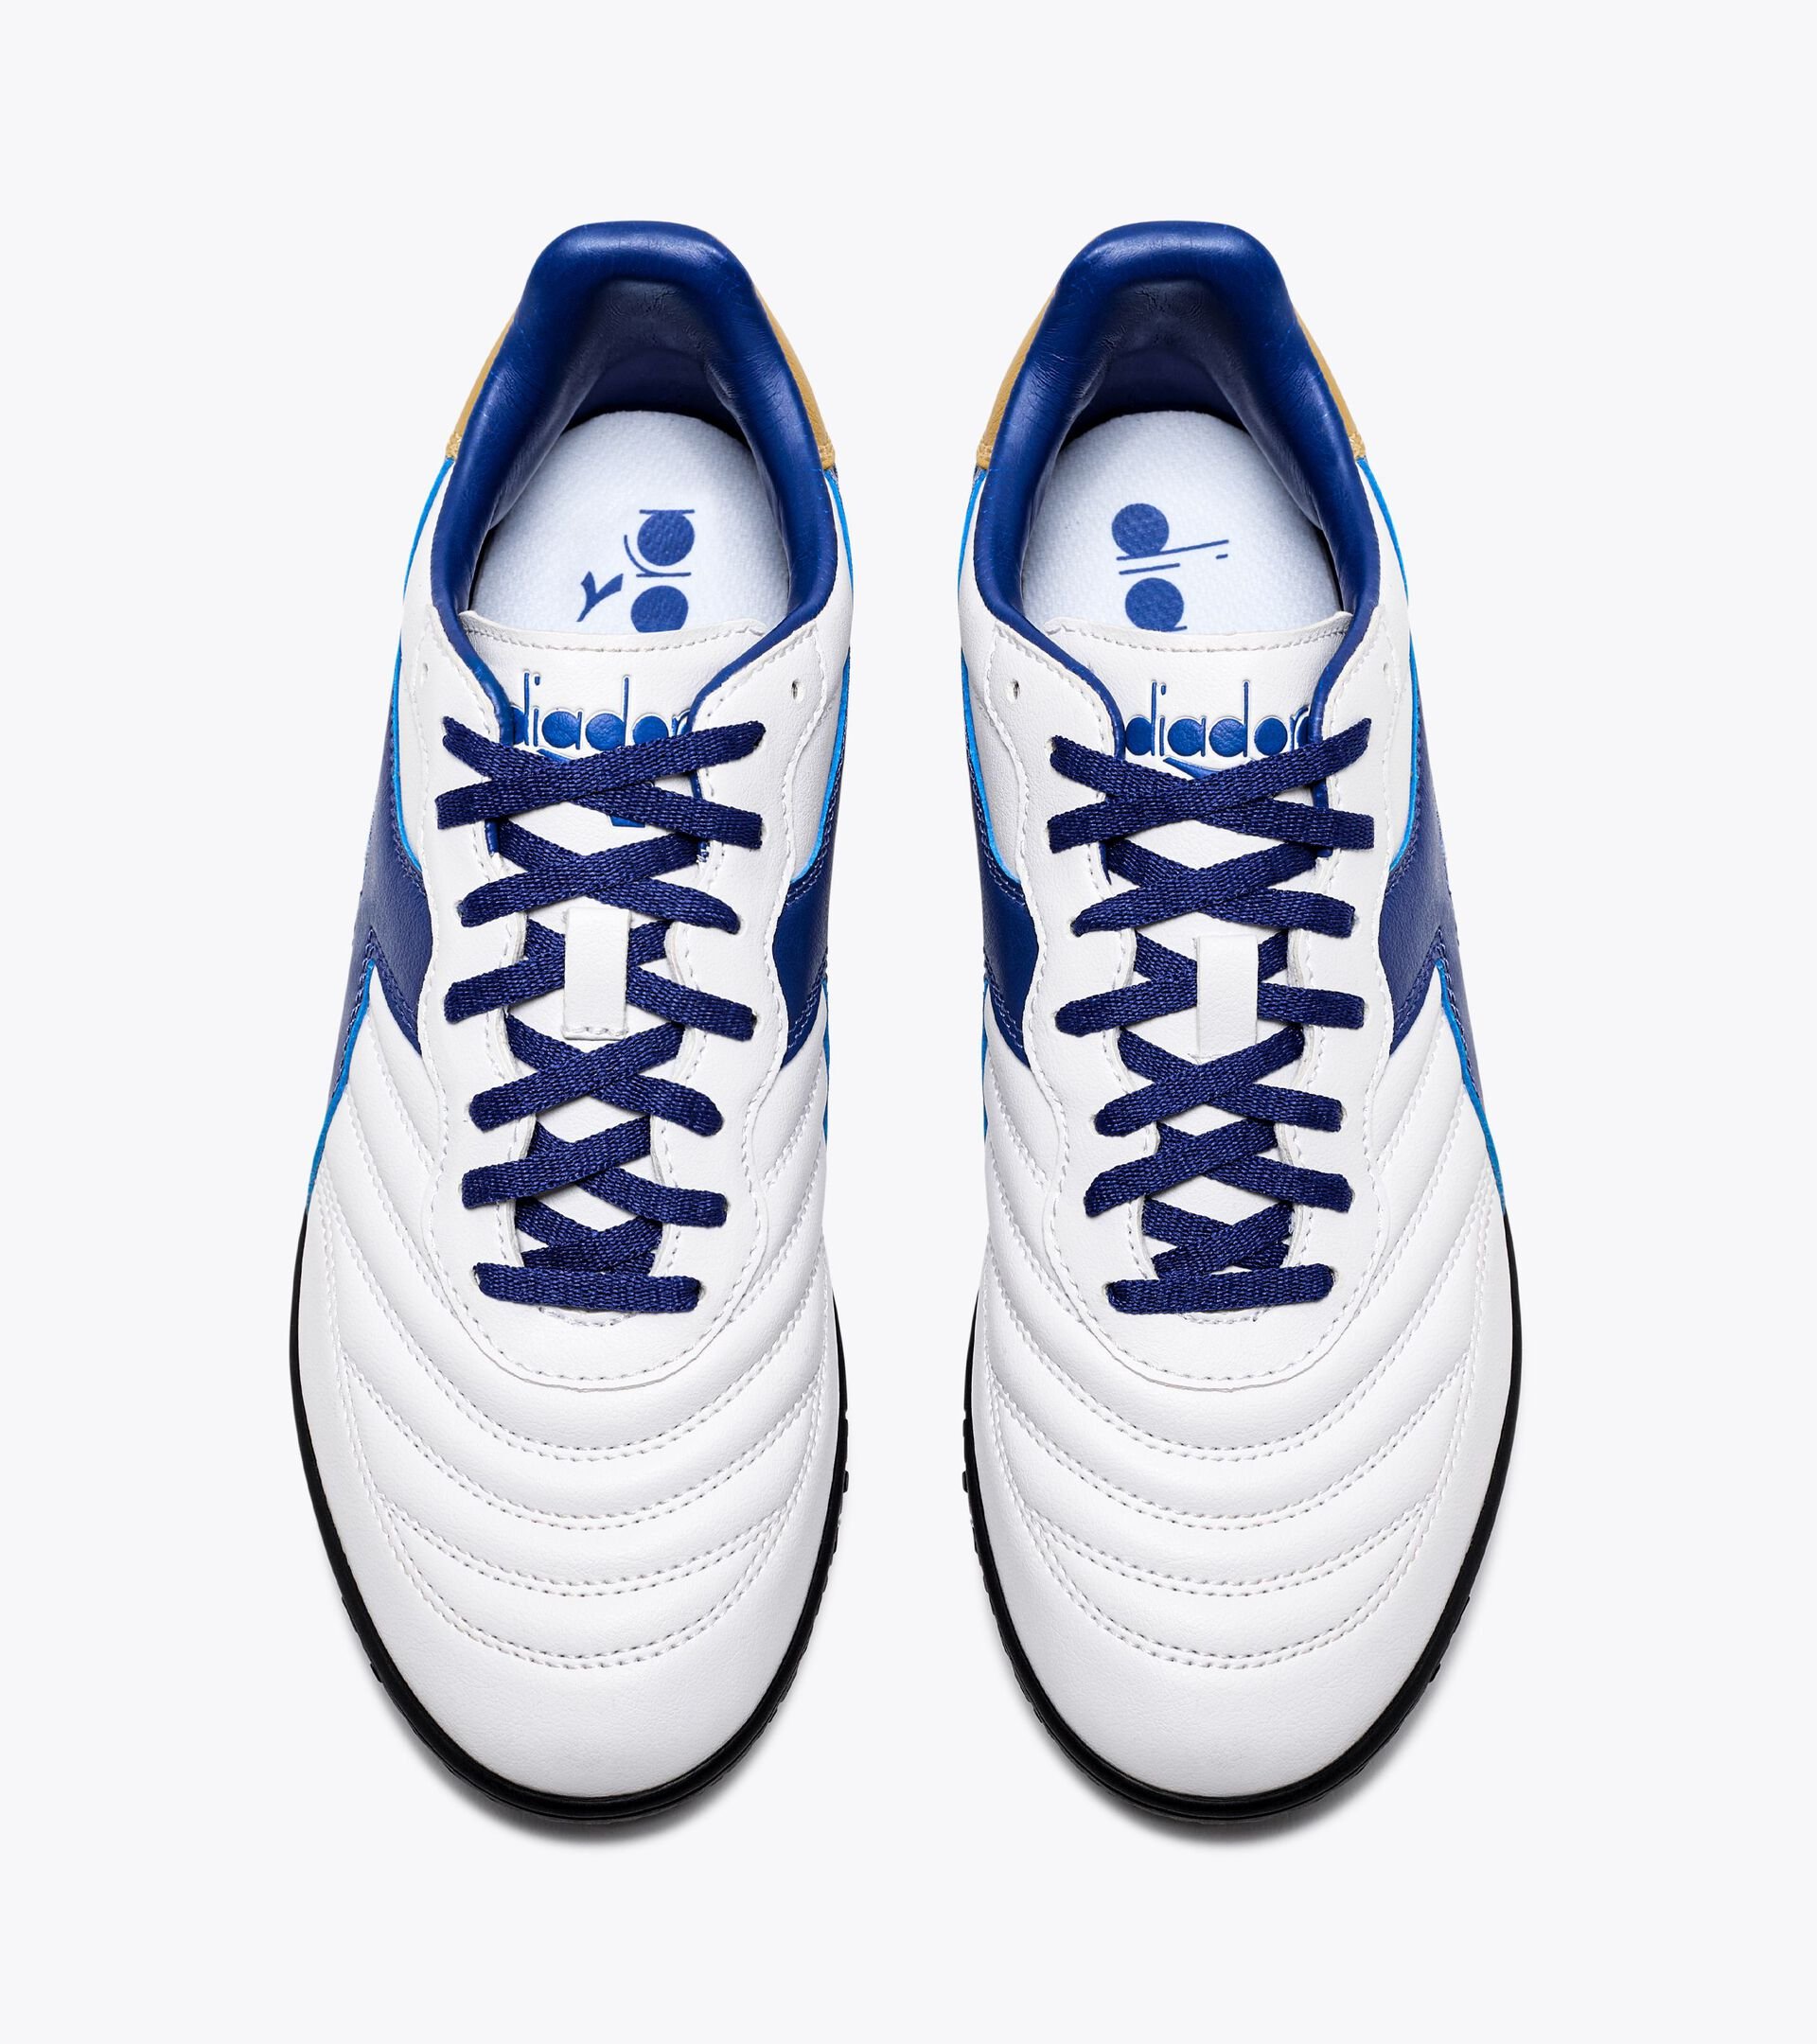 Calcio boots for synthetic turfs or firm grounds - Men BRASIL 2 R TFR WHITE/MAZARINE BLUE/GOLD - Diadora